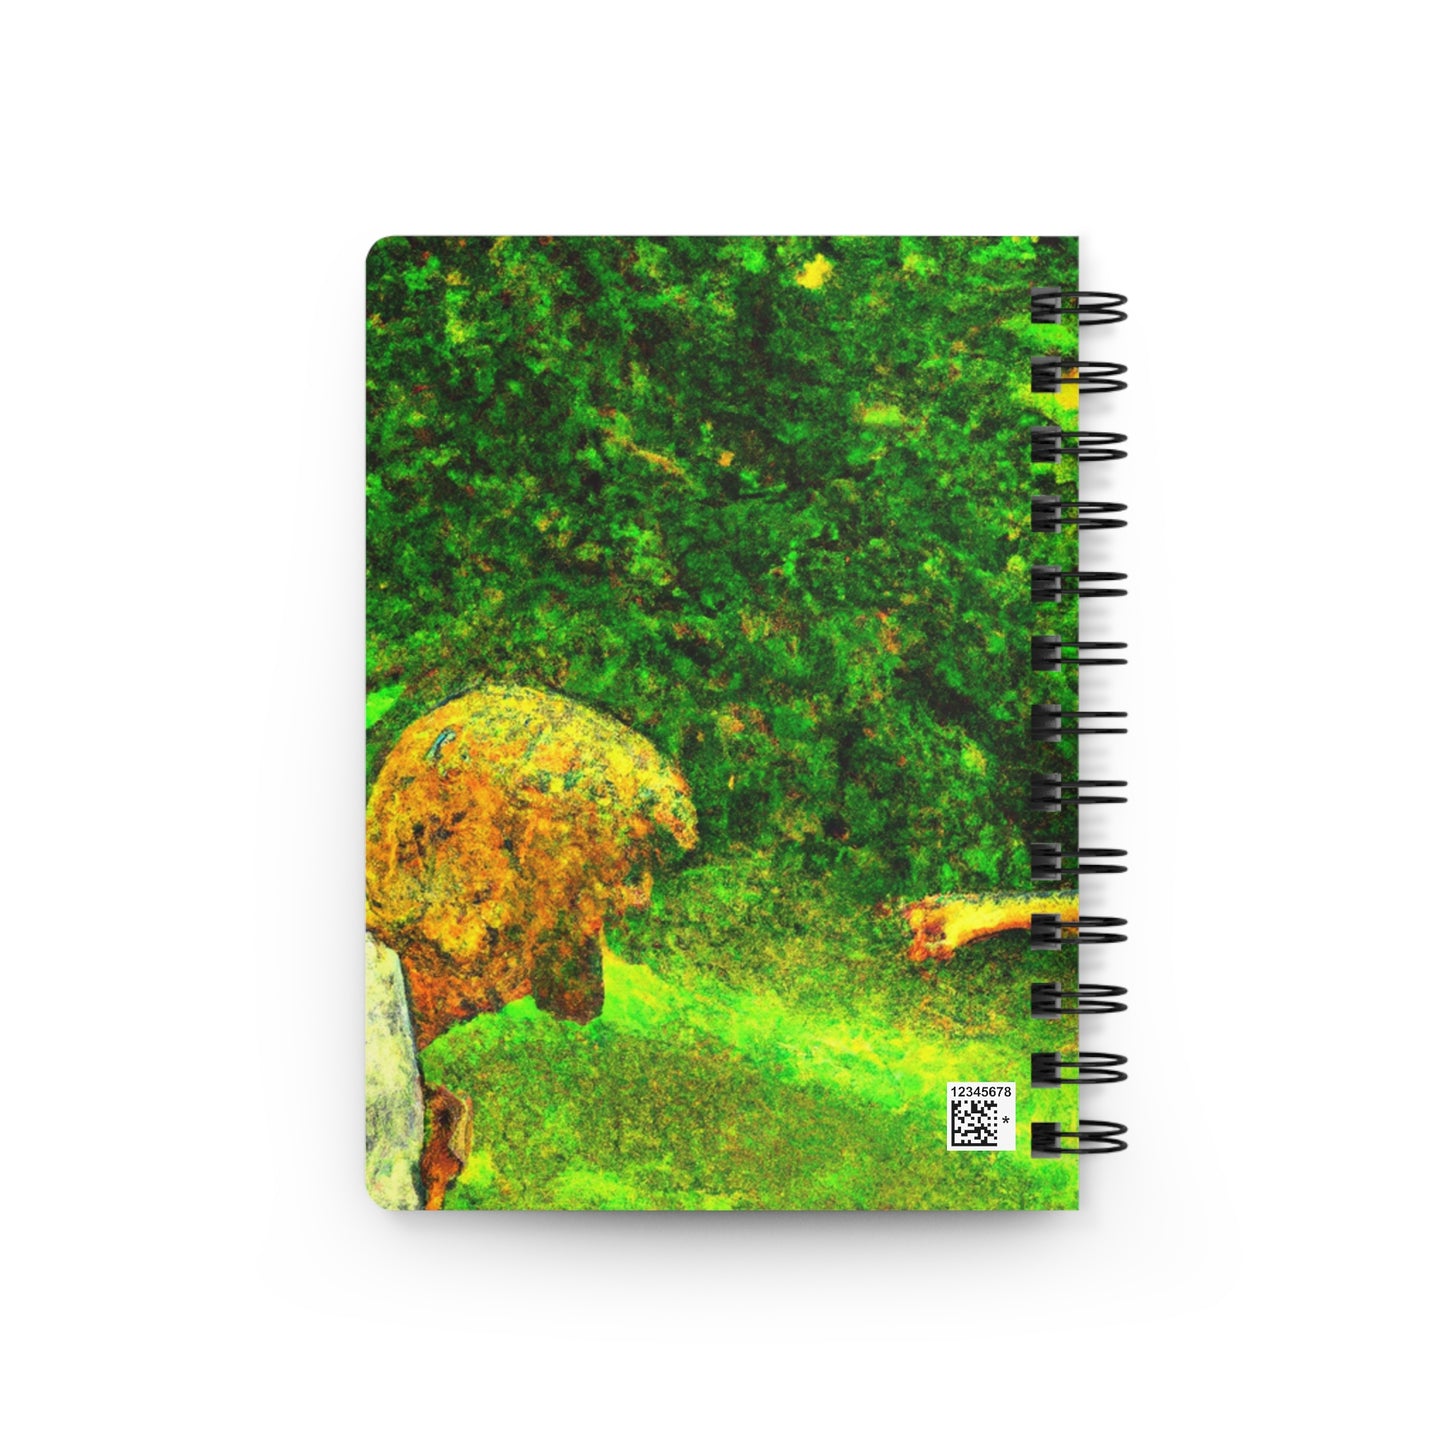 The Fairy and the Brave Adventurer - The Alien Spiral Bound Journal